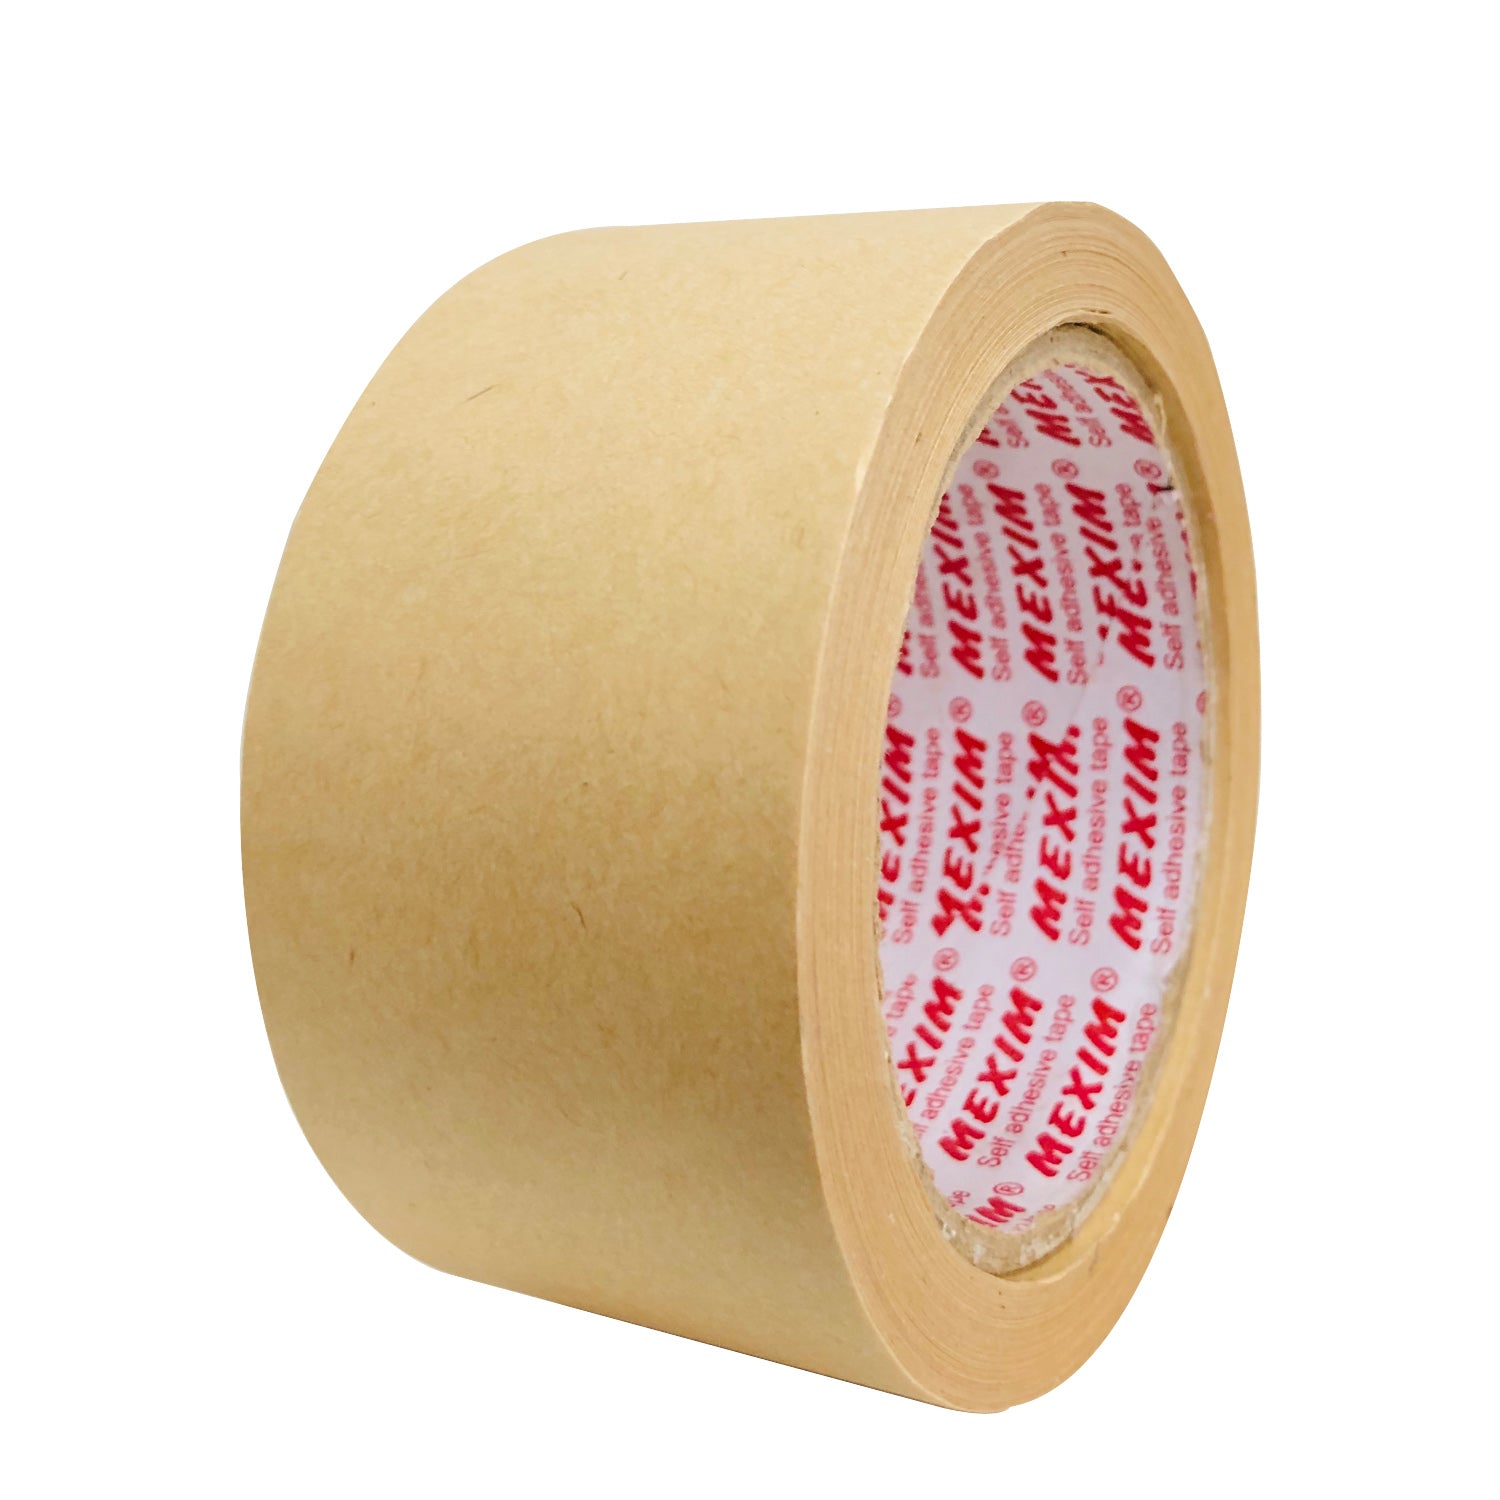 Ecosattva Self Adhesive Eco-Friendly Kraft Paper Tape | 72 mm x 50 meters x 4 Rolls, Easy to Apply, Used for box Packaging